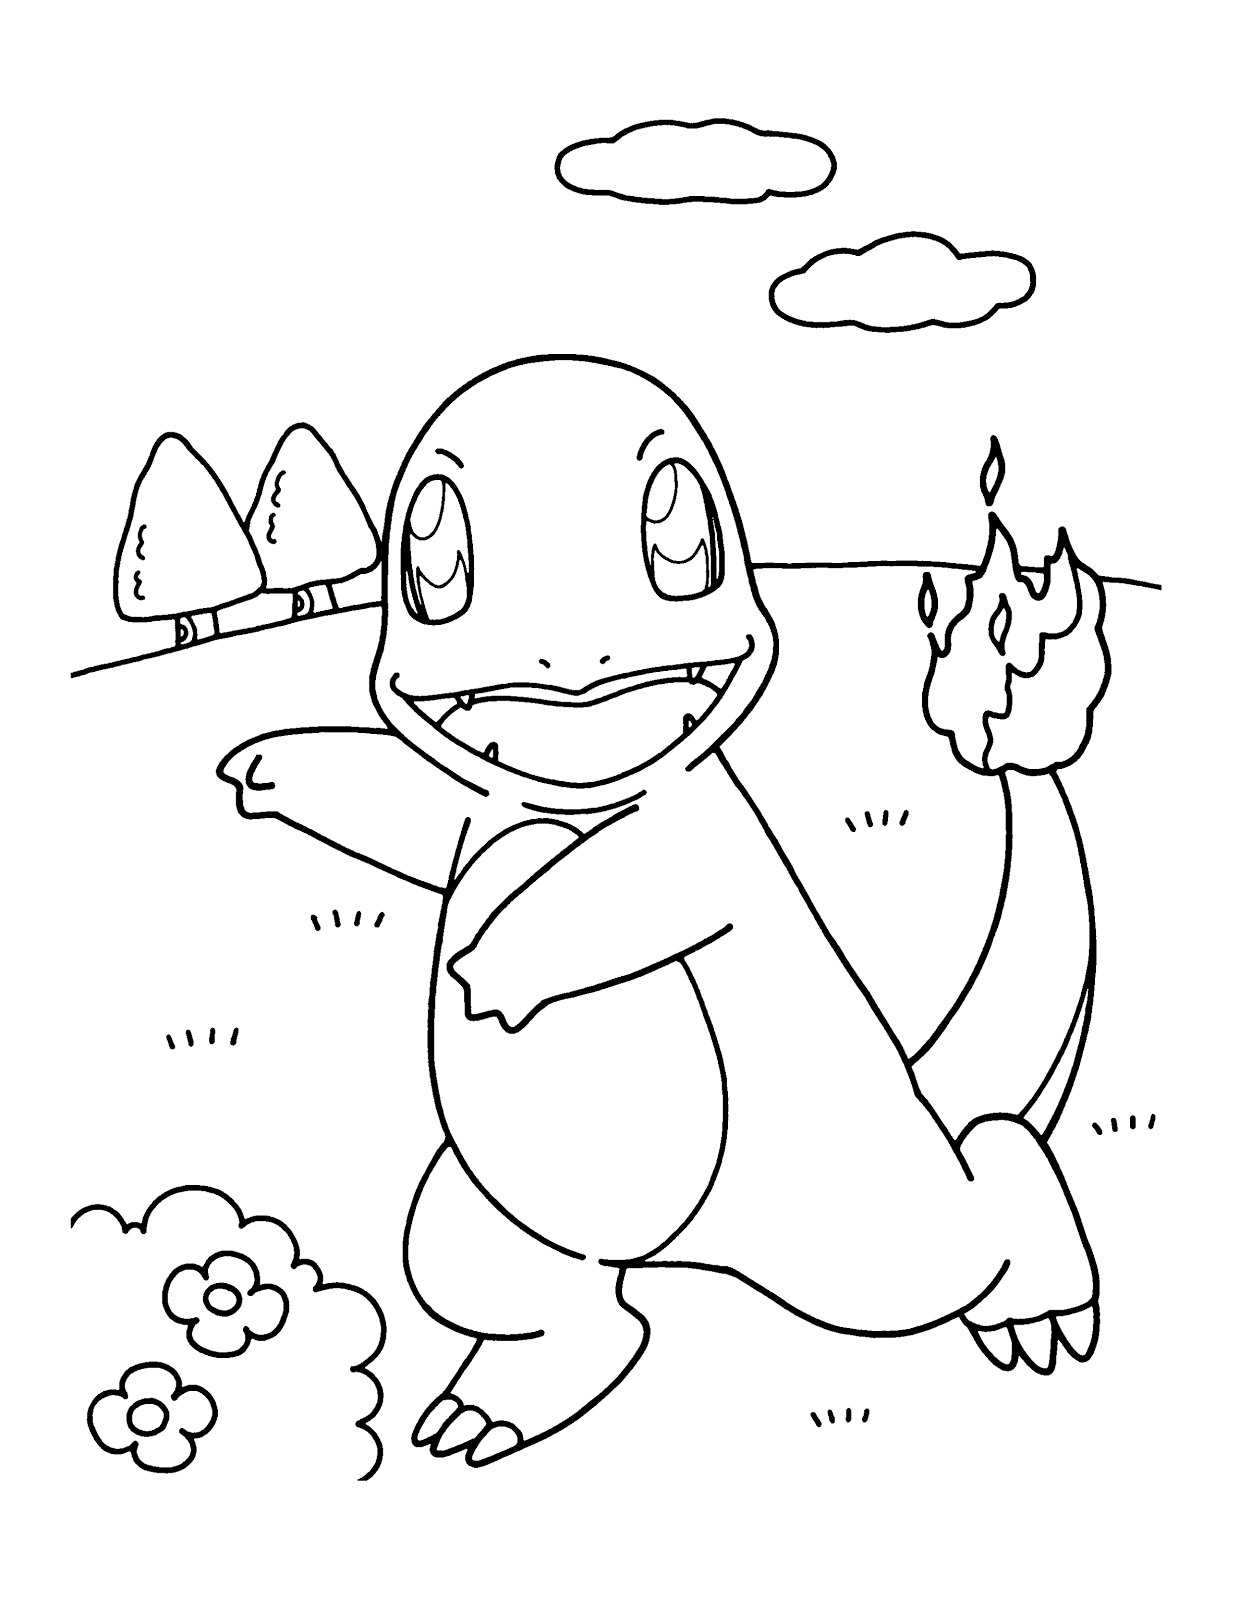 Charmander Coloring Pages Free Pokemon Coloring Pages Measuring 30x40cm and printed on fuji film photographic stock each of our collector prints features artwork. charmander coloring pages free